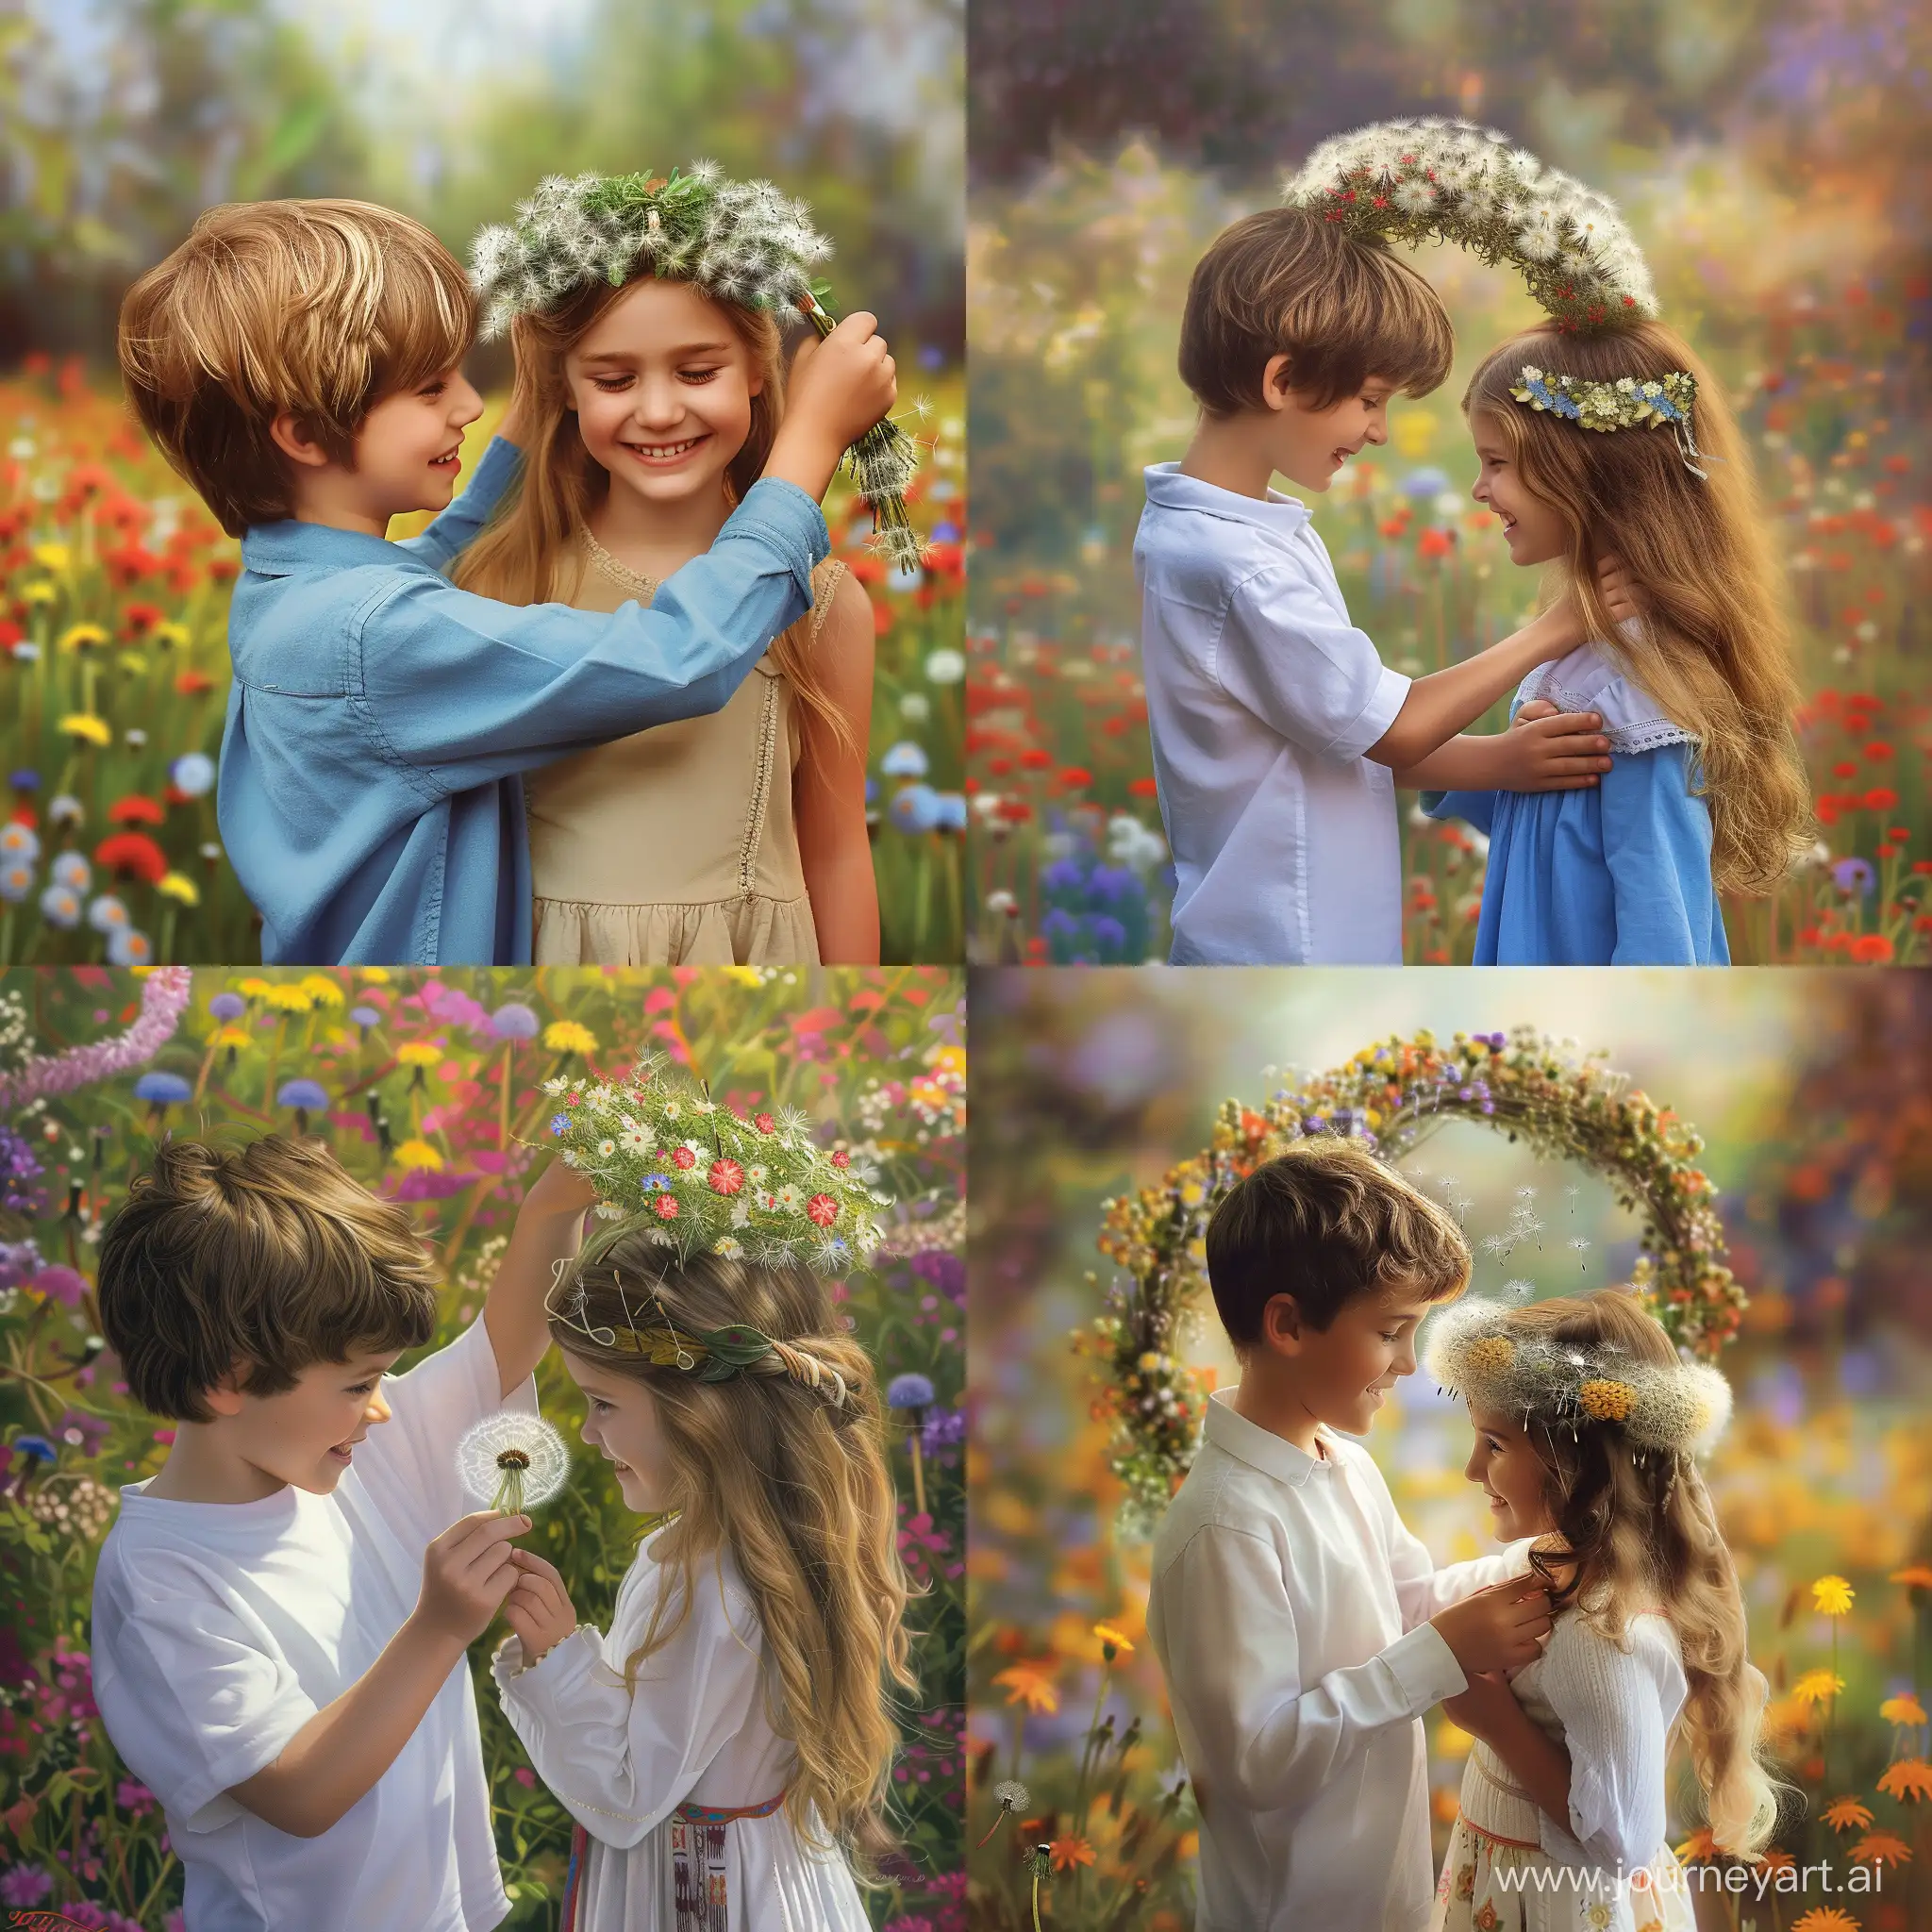 Joyful-Children-Adorning-with-Dandelion-Crowns-in-a-Vibrant-Summer-Meadow